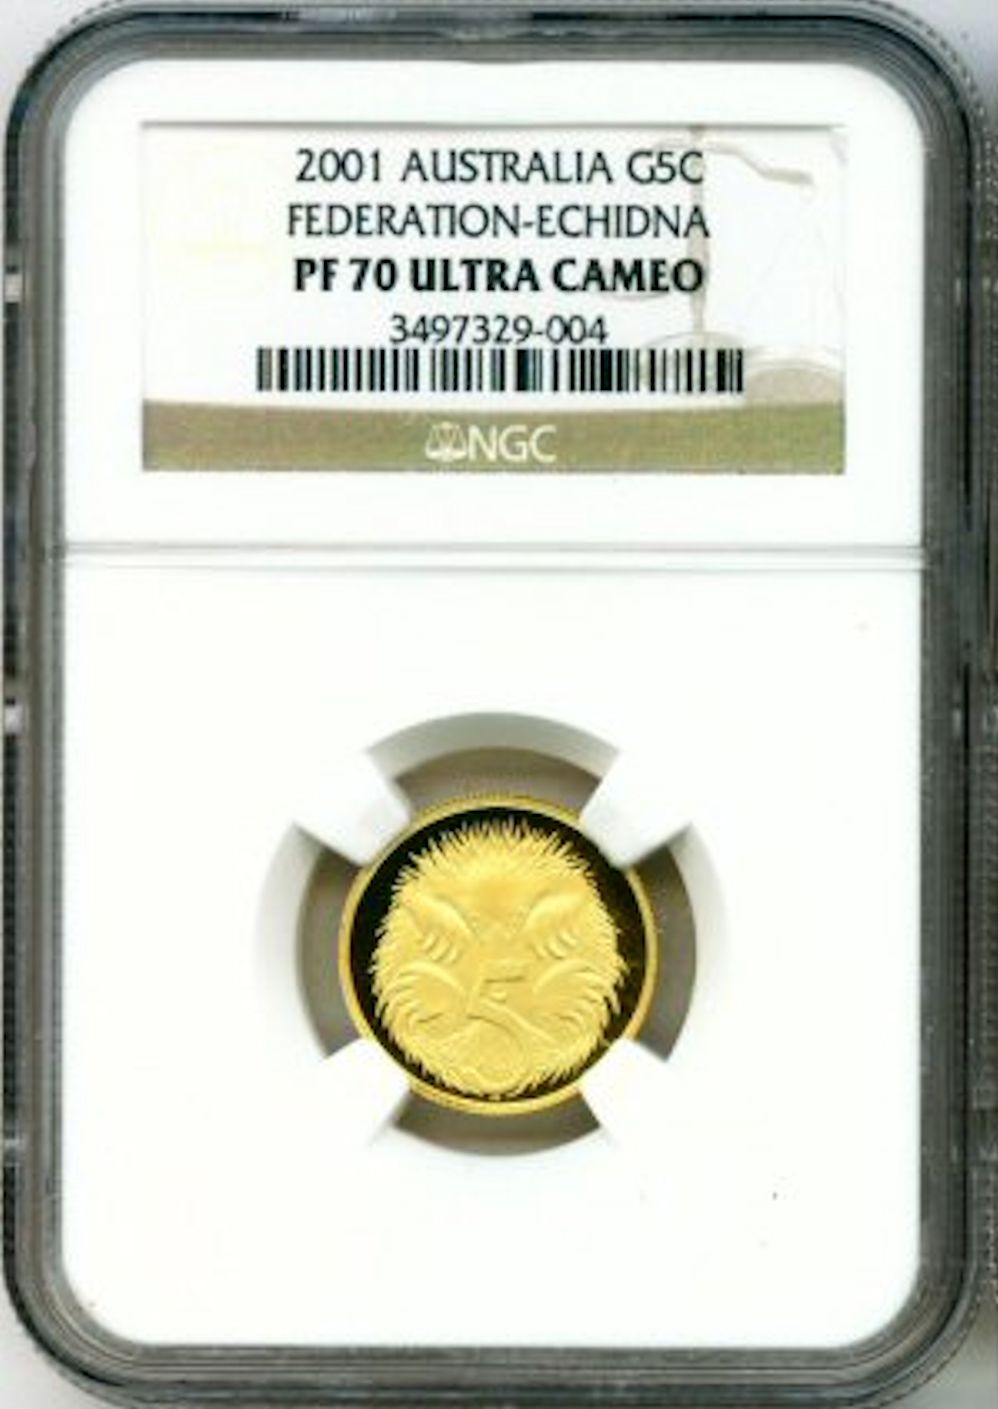 2001 GOLD AUSTRALIA 5 CENT NGC PERFECT PROOF 70 ULTRA CAMEO ONY 650 MINTED "ECHIDNA'